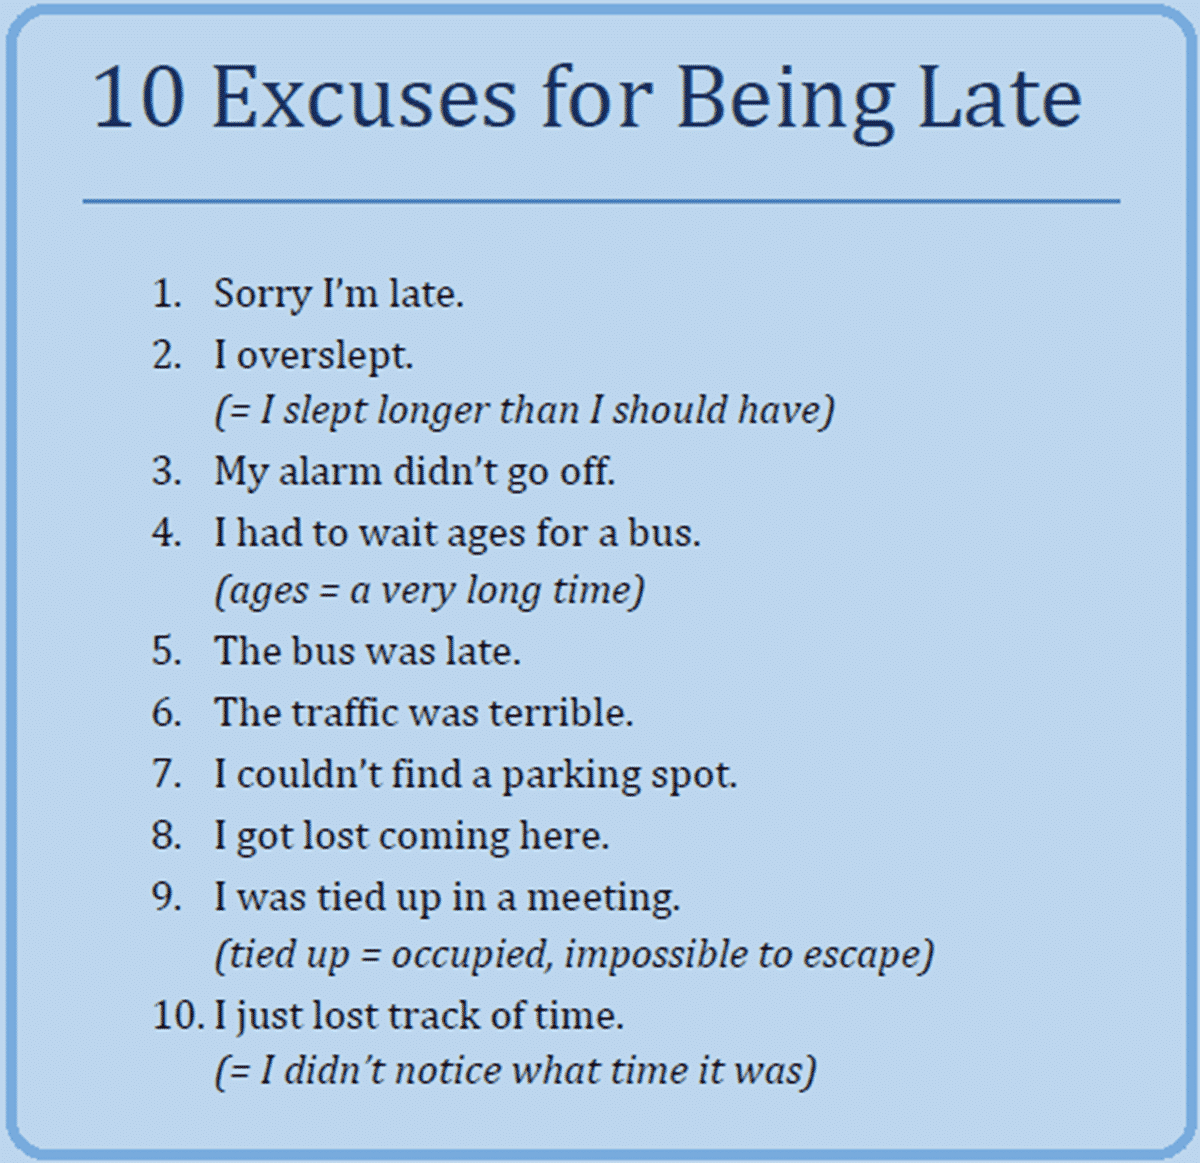 Common Excuses for Being Late